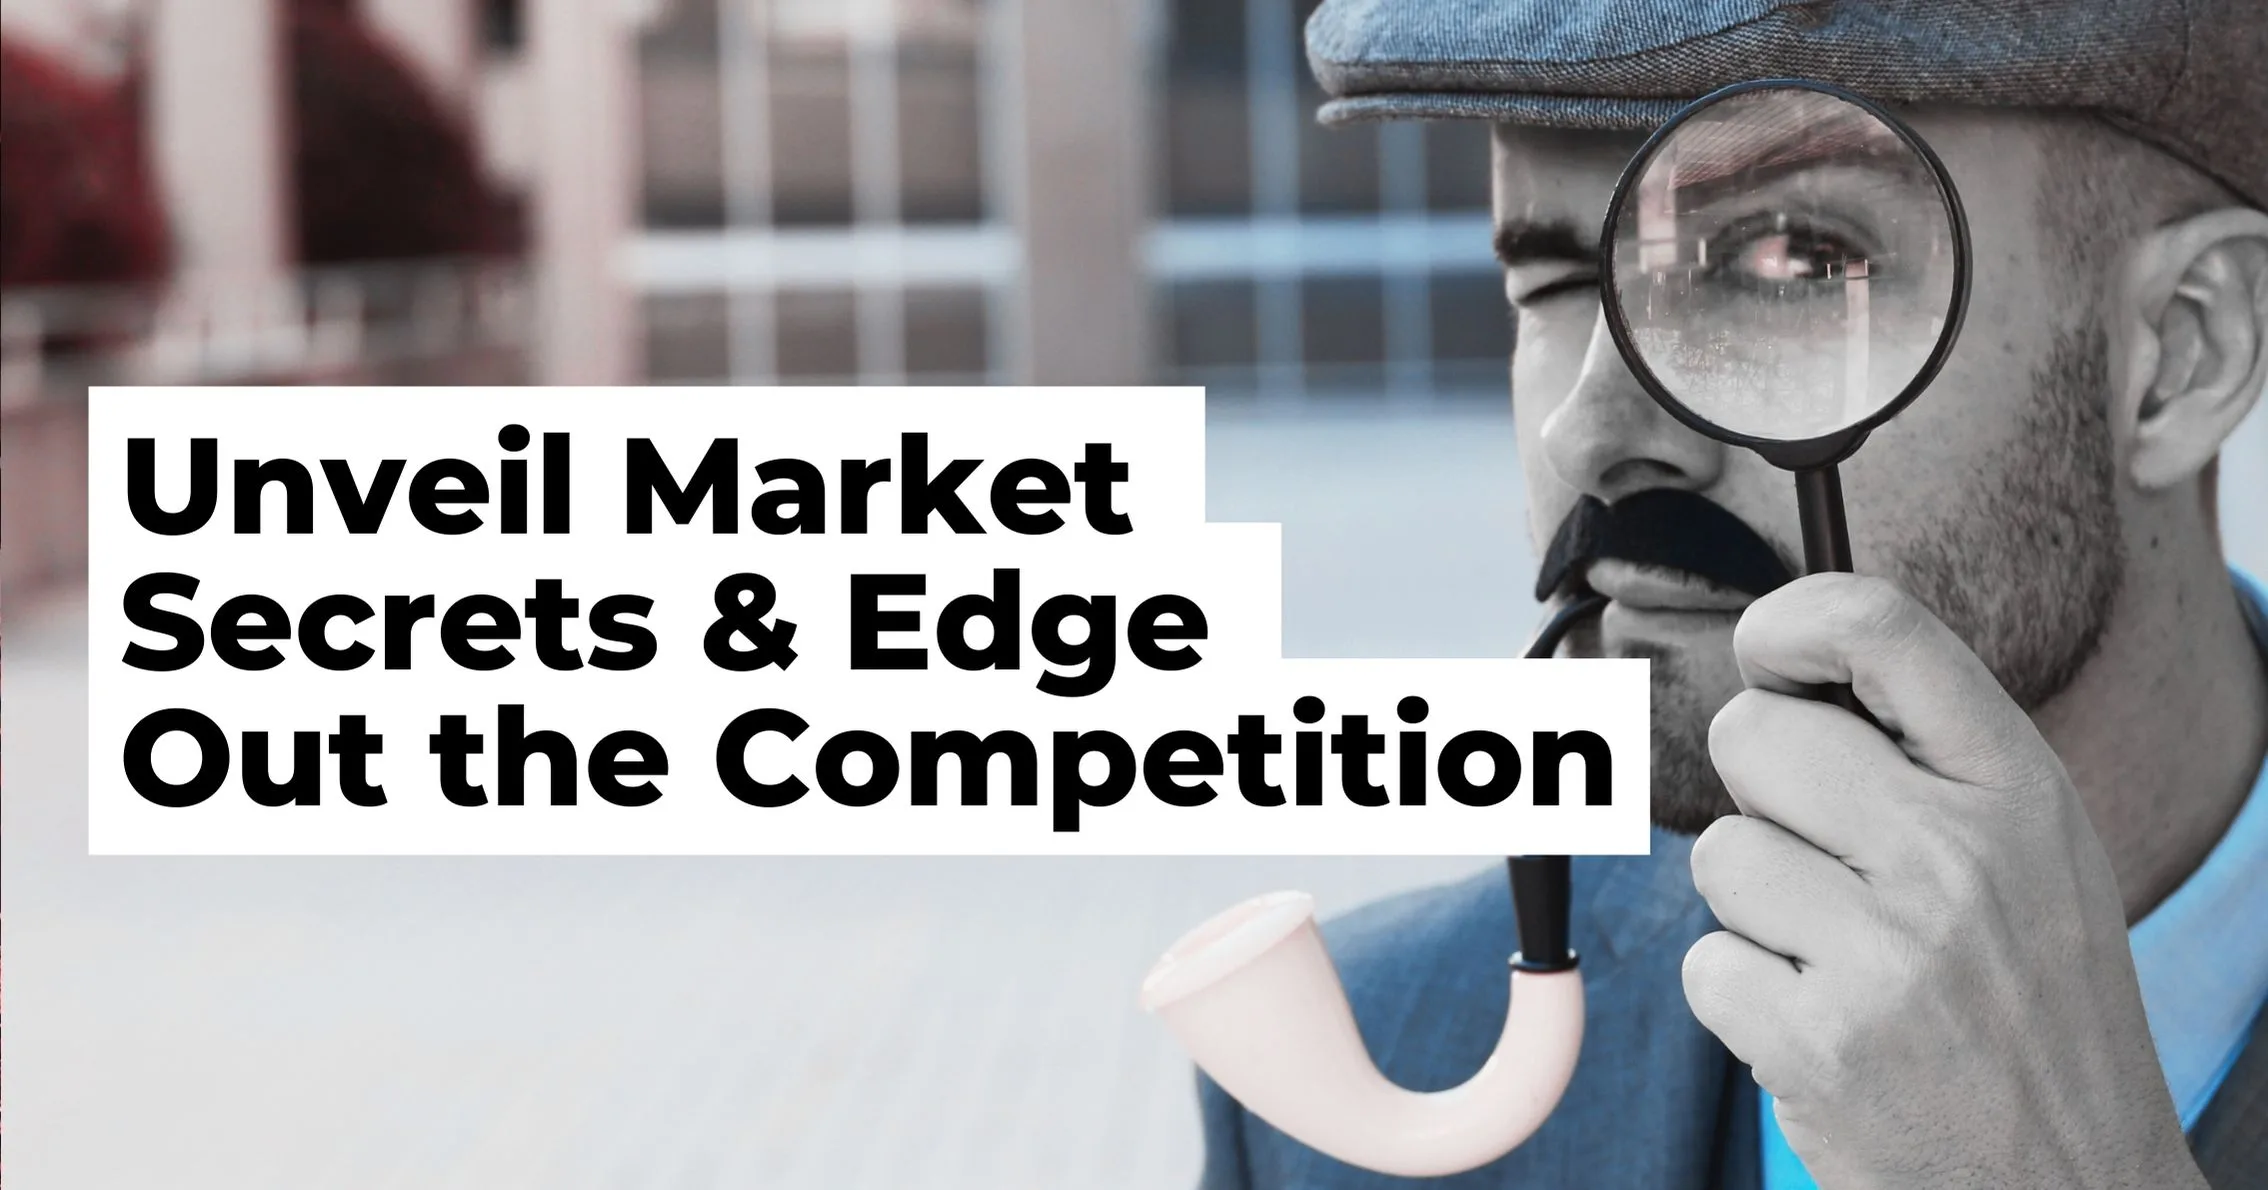 In Just 60 Minutes: Unveil Market Secrets & Edge Out the Competition